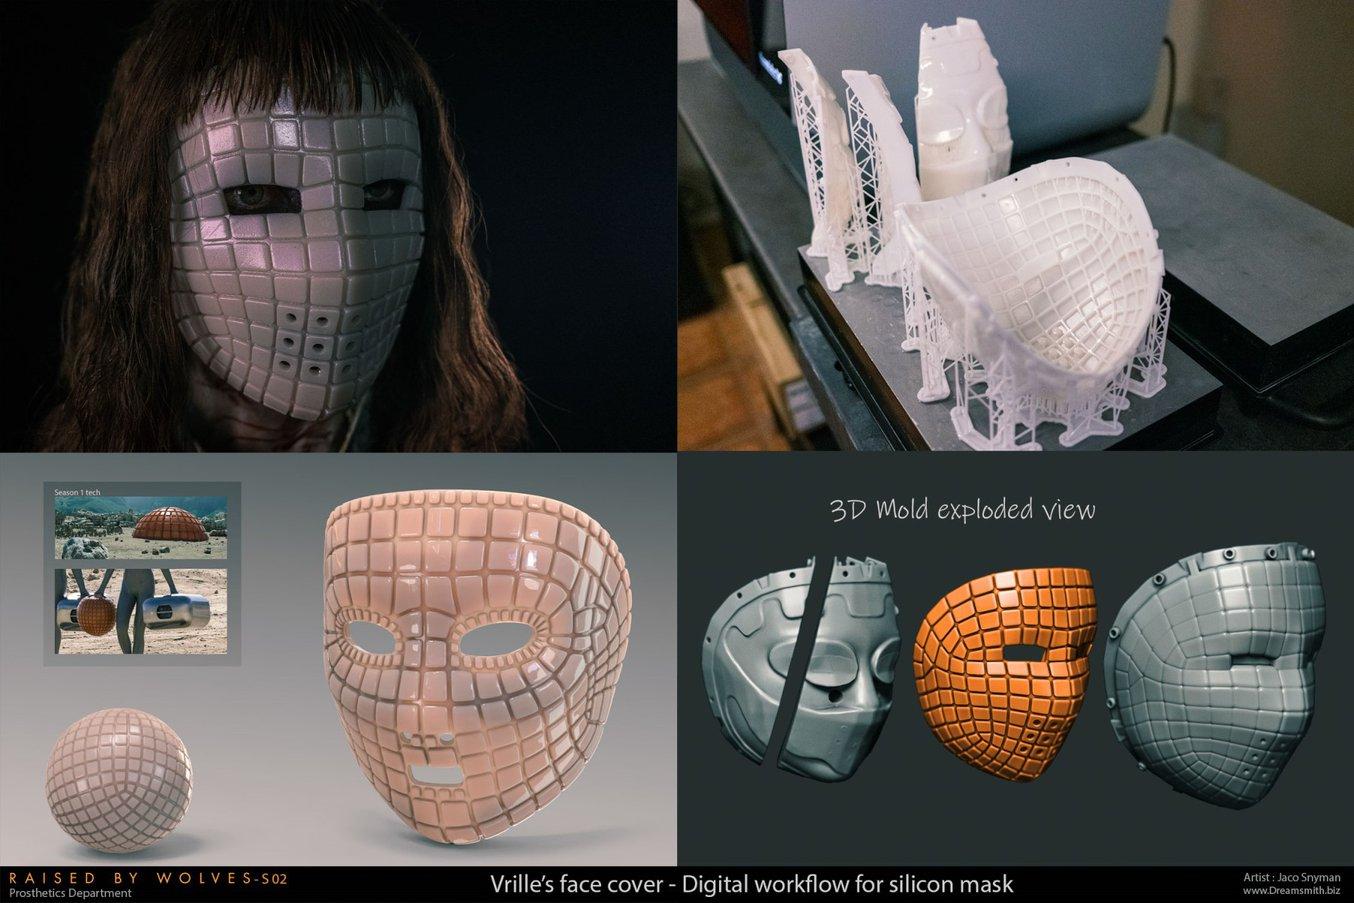 Designing and printing a complex shape and highly-detailed silicone mask with 3D printing.